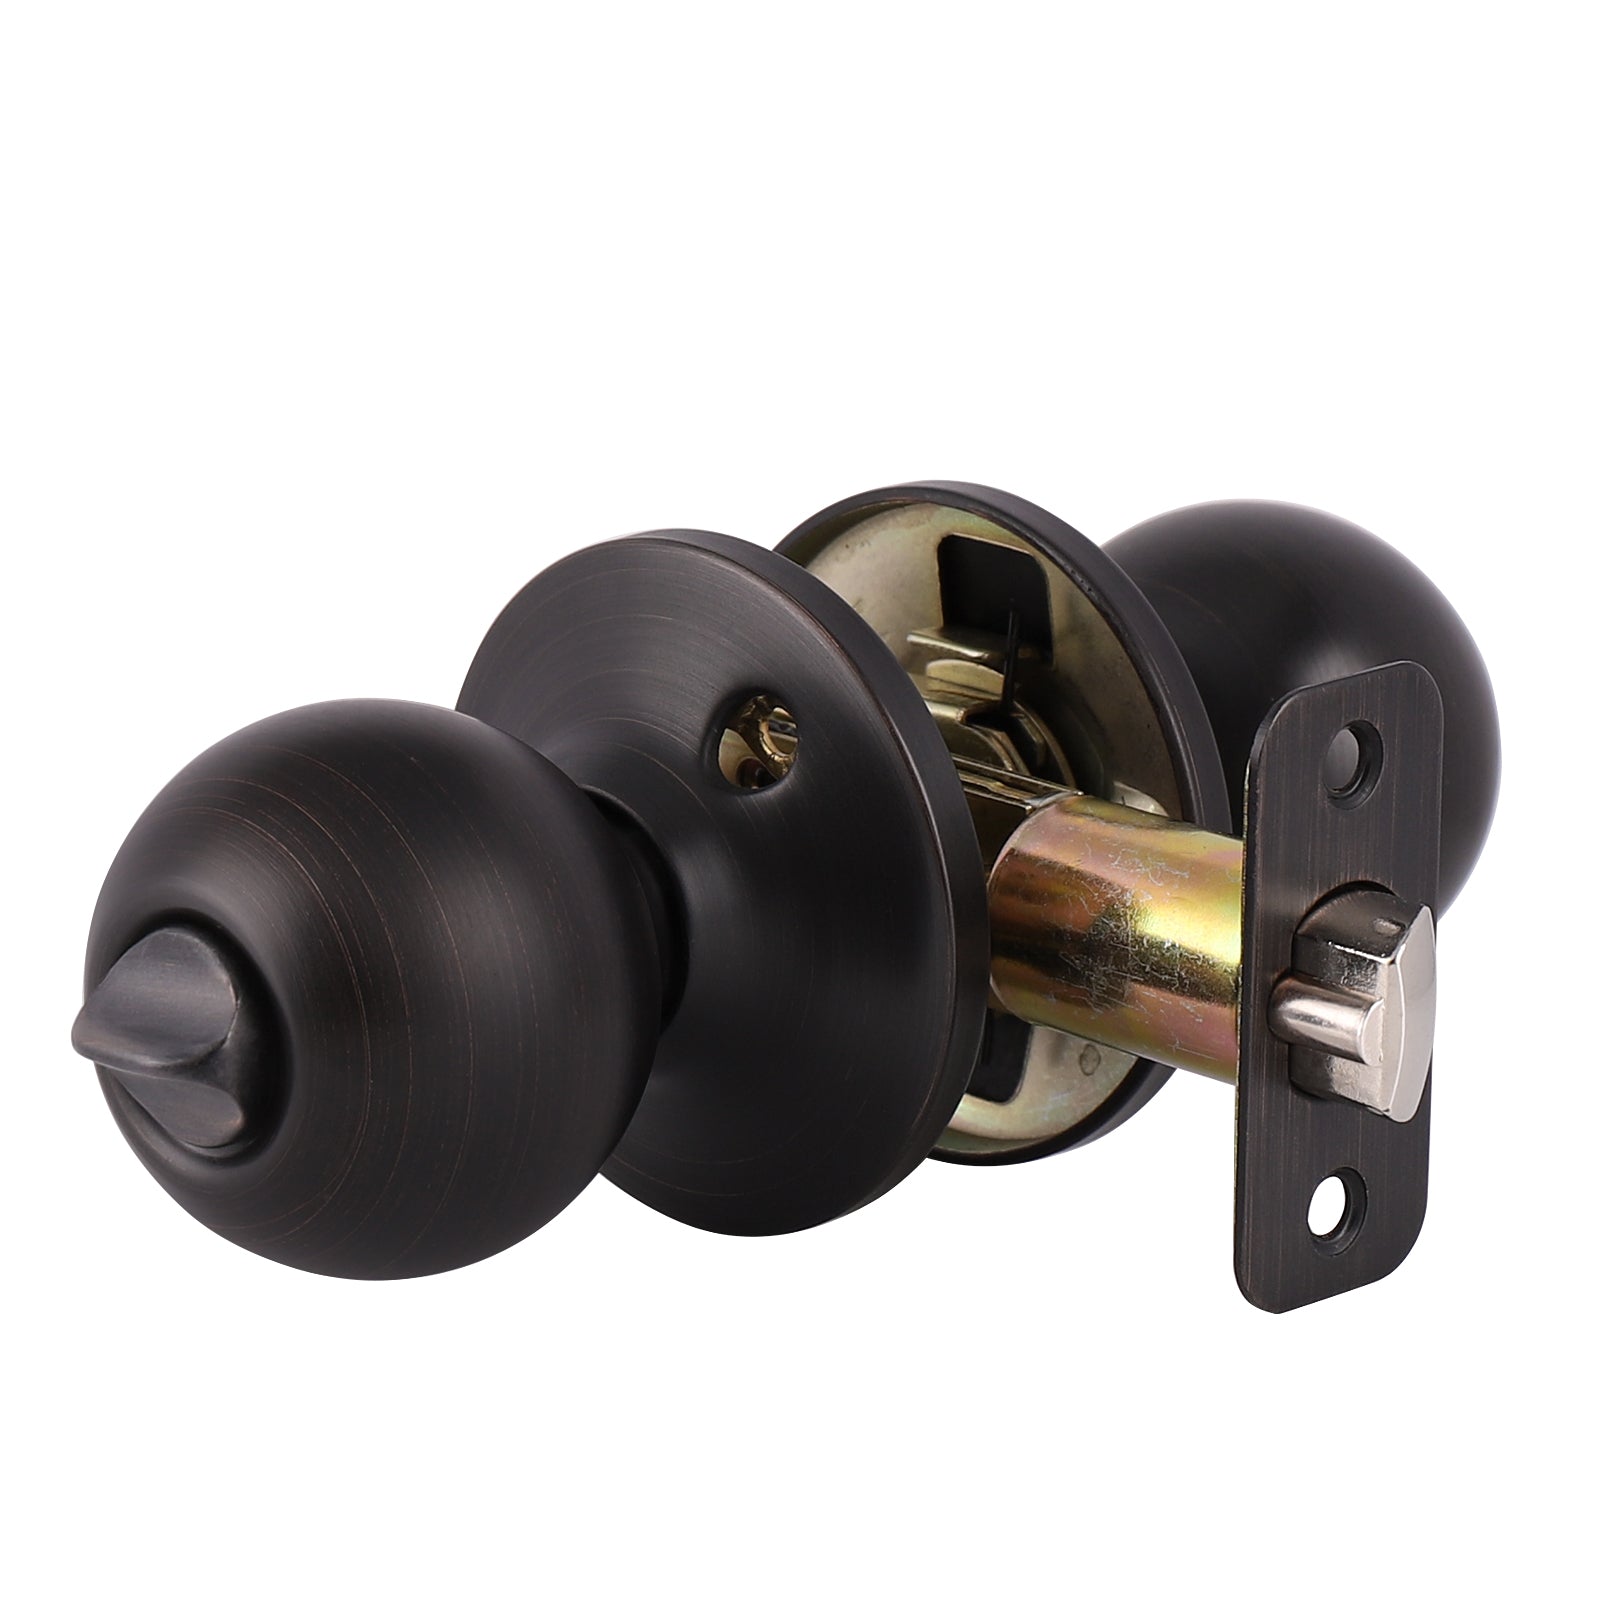 Single Connect Rod Round Ball Knobs Entry Lock /Privacy/Passage/Dummy Knob, Oil Rubbed Bronze Finish DL5763ORB